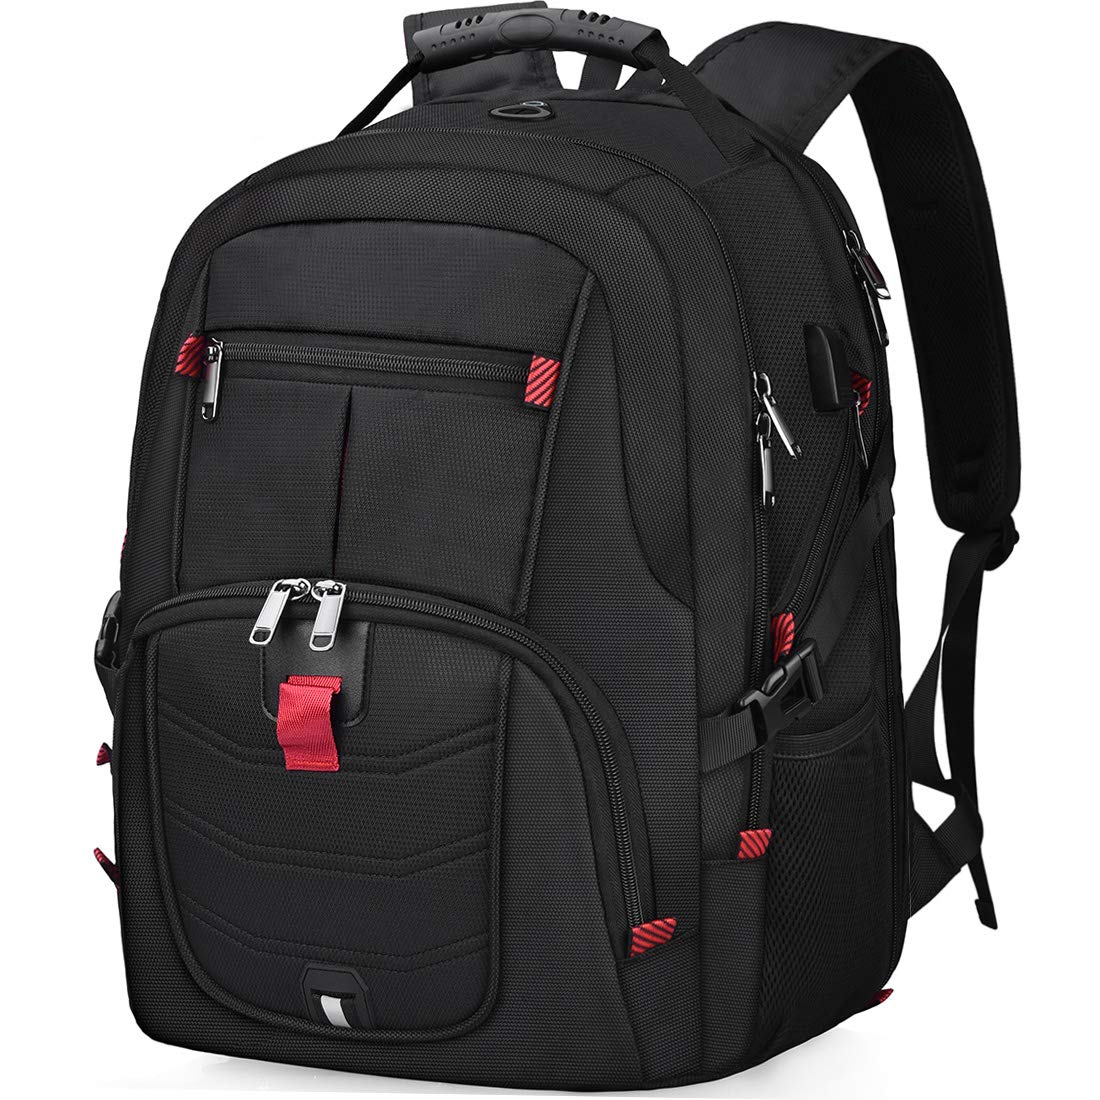 Best Laptop Backpacks for Students and Professionals